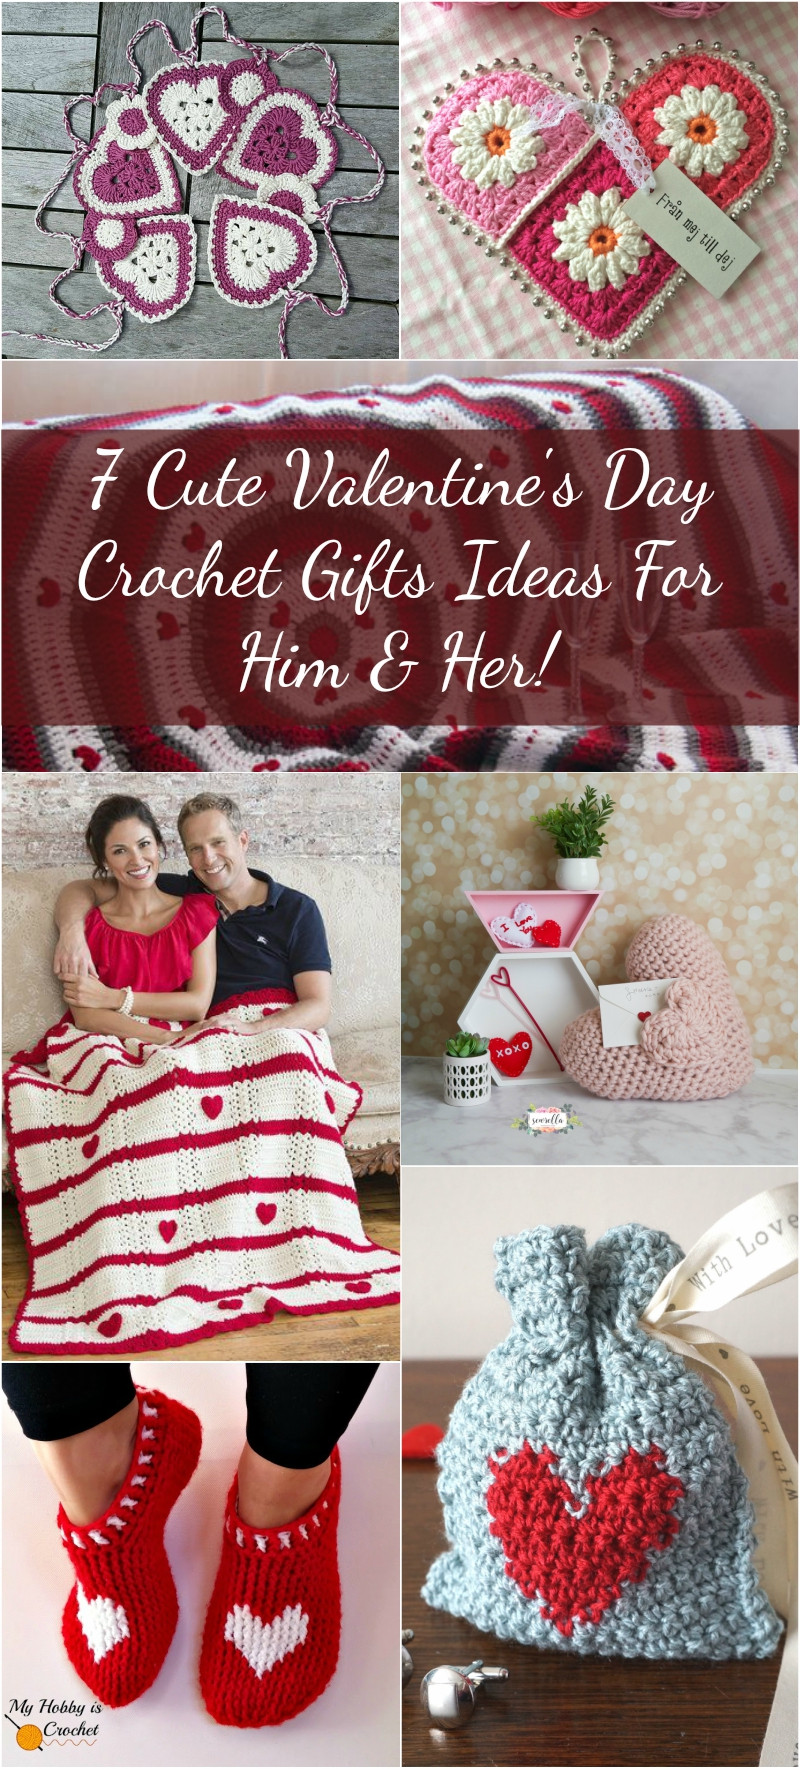 Gift Ideas For Her Valentines
 7 Cute Valentine s Day Crochet Gifts Ideas For Him & Her